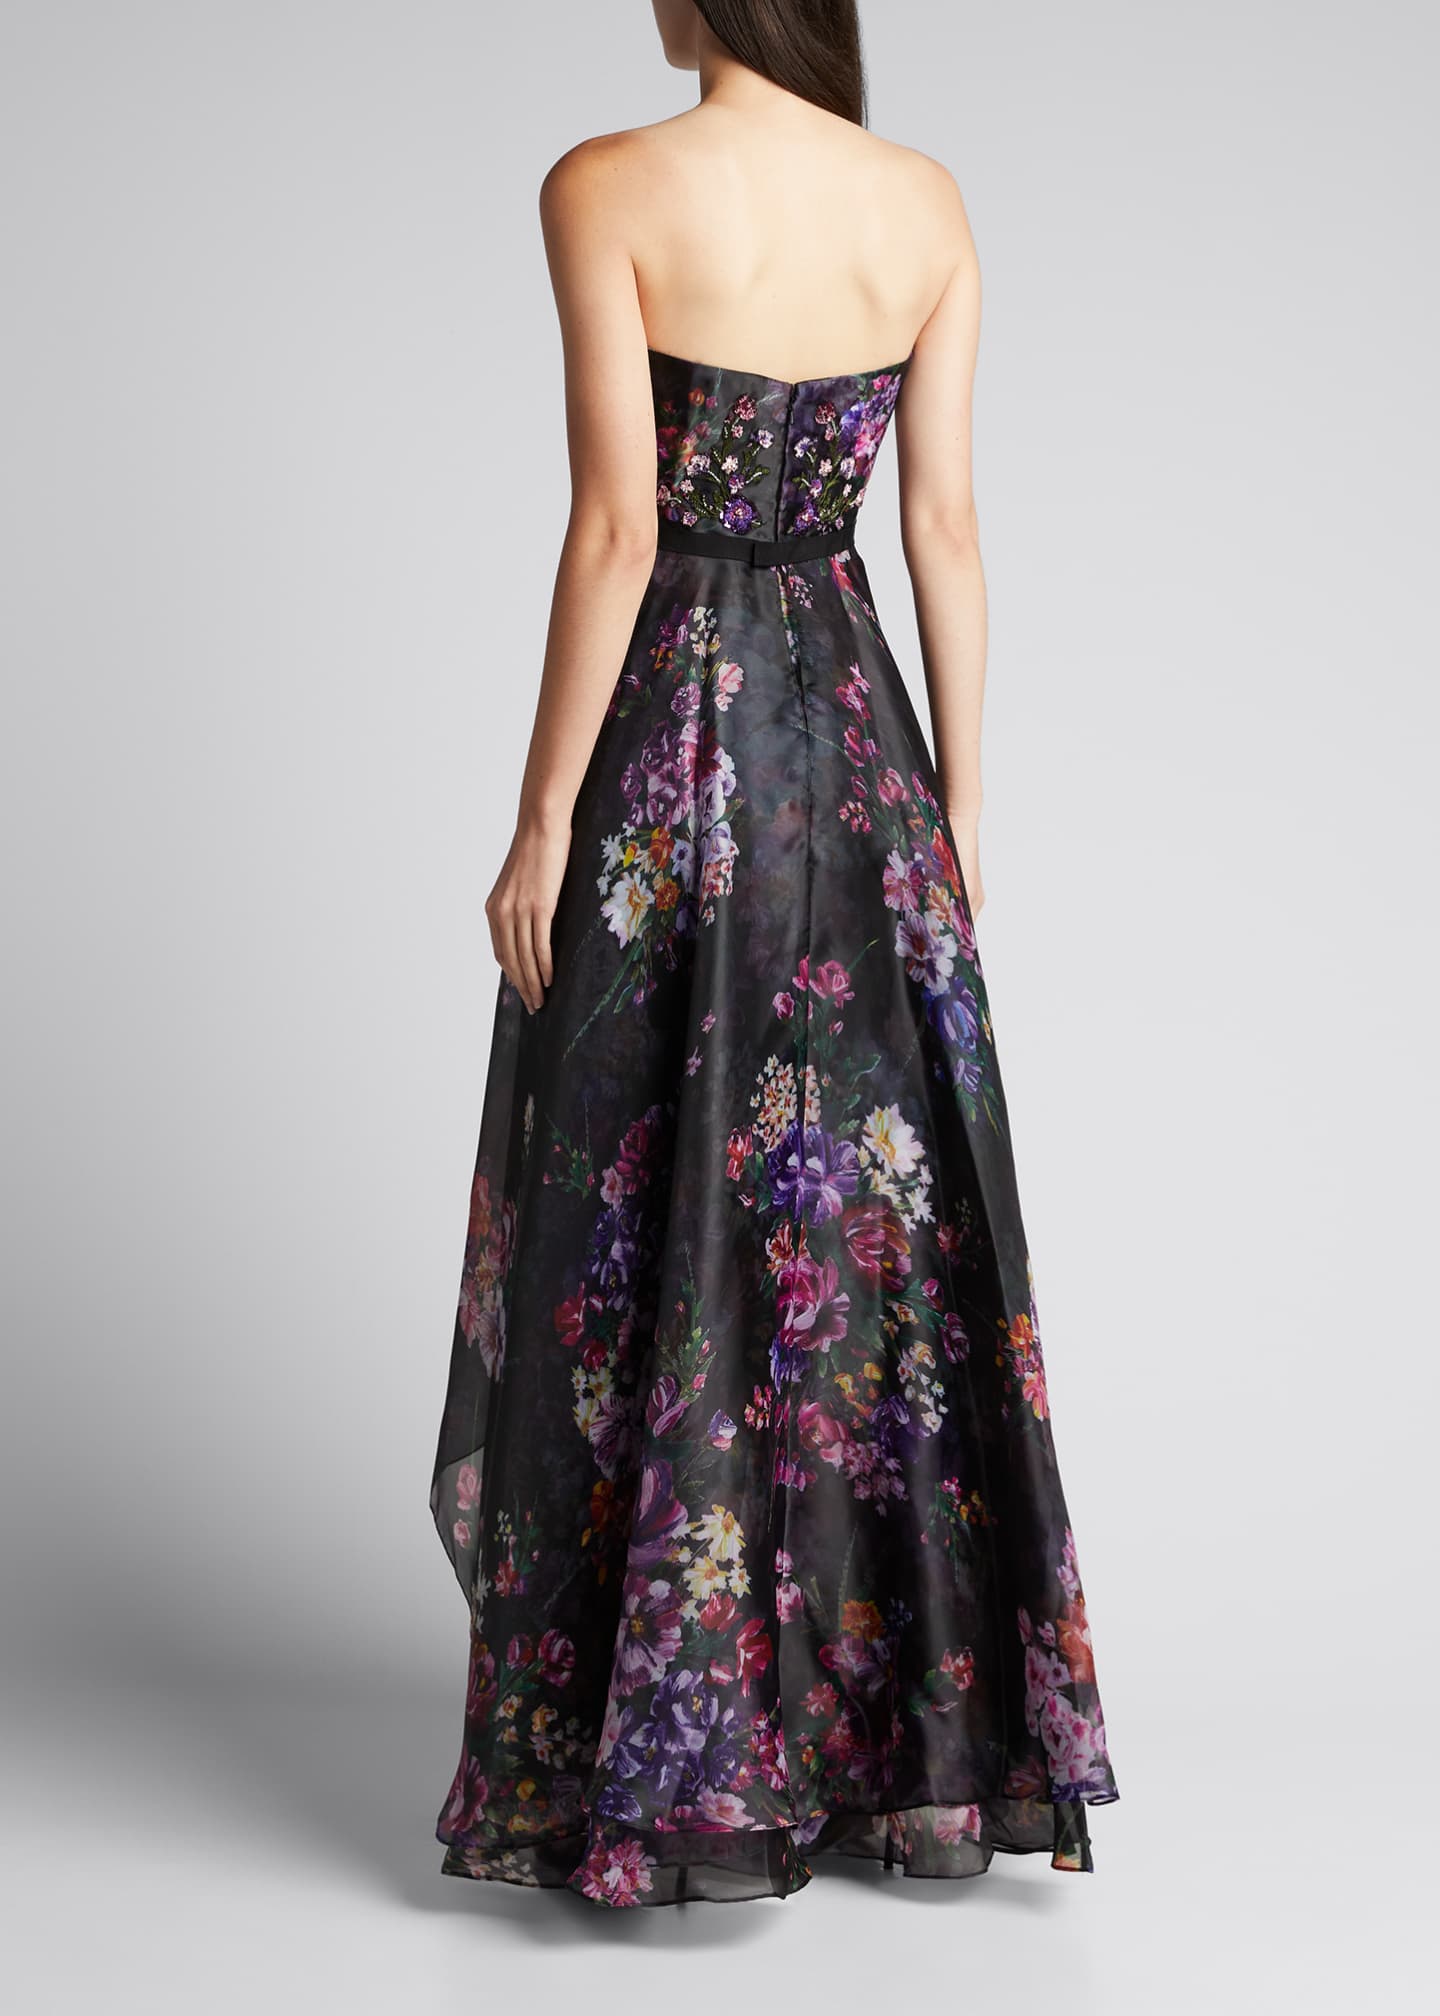 Marchesa Notte Strapless Floral-Print Organza High-Low Gown - Bergdorf ...